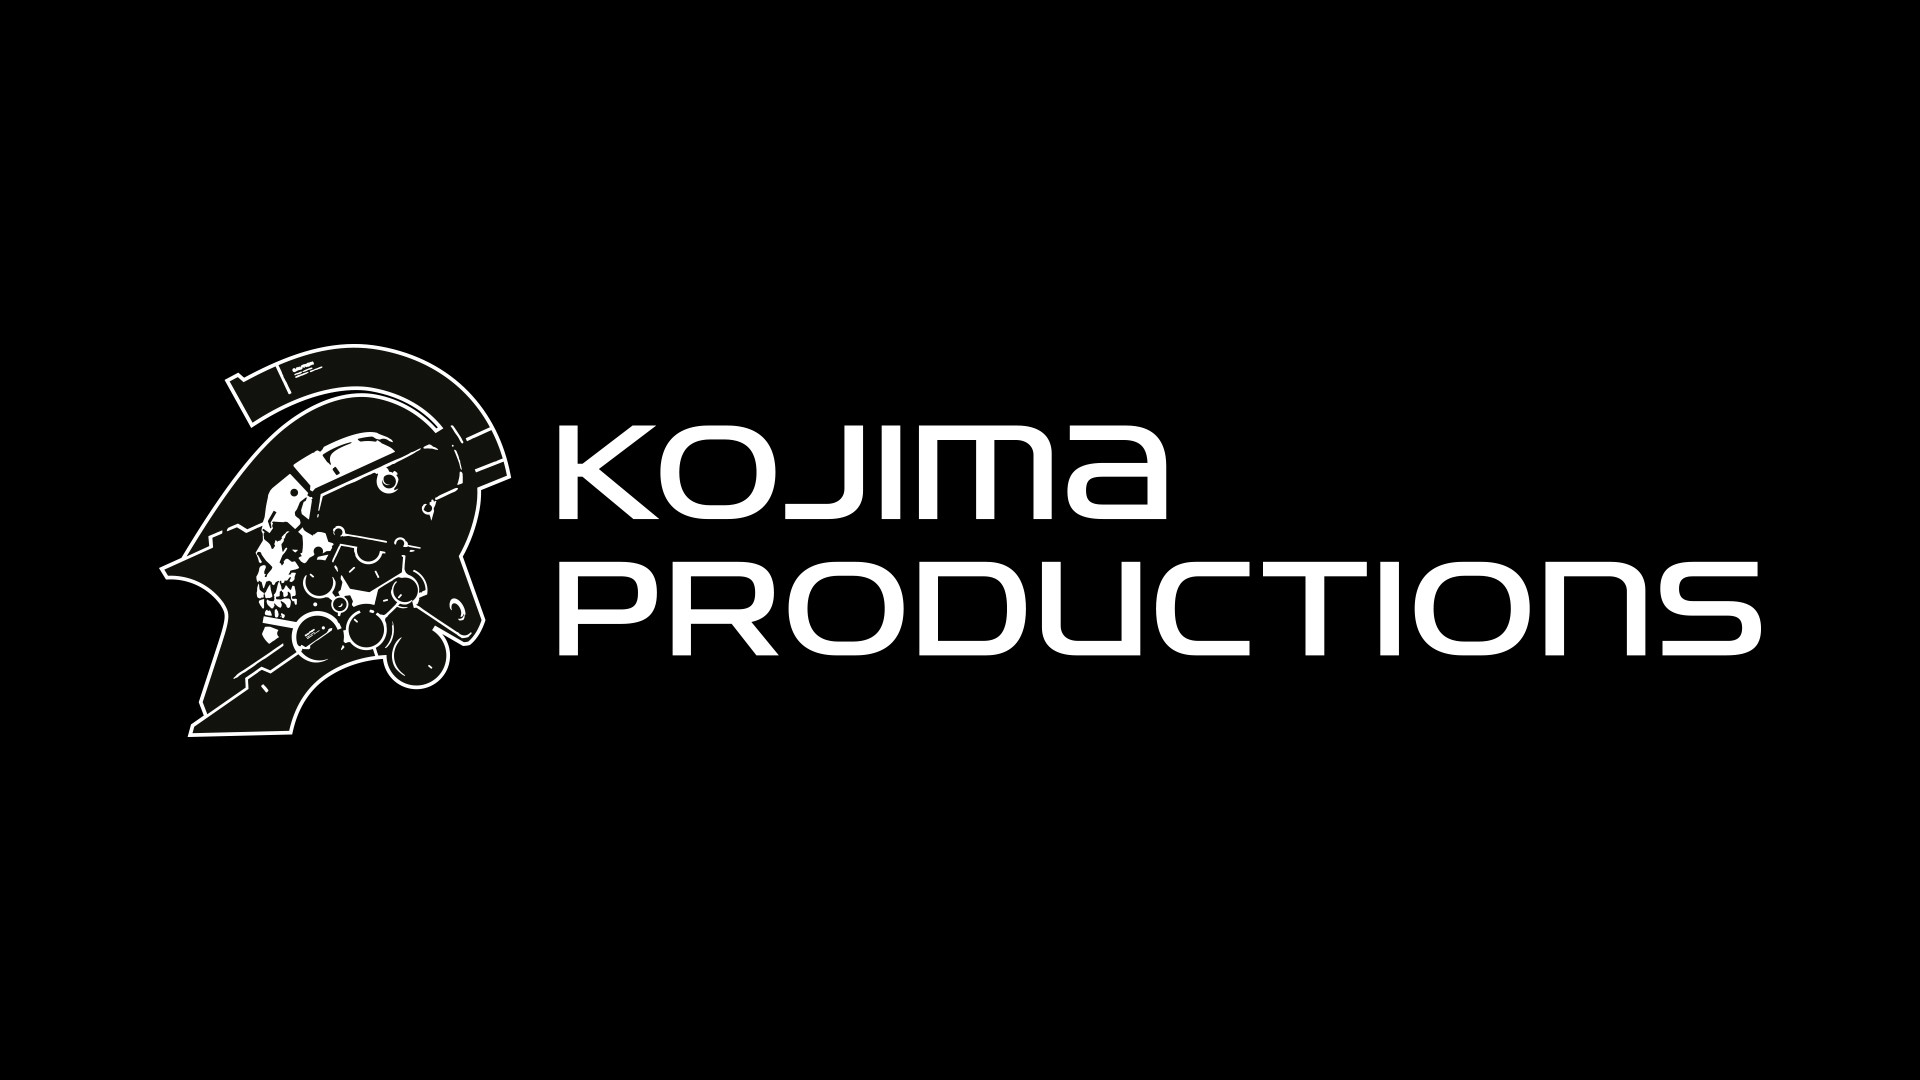 Hideo Kojima Is Working on a New Game